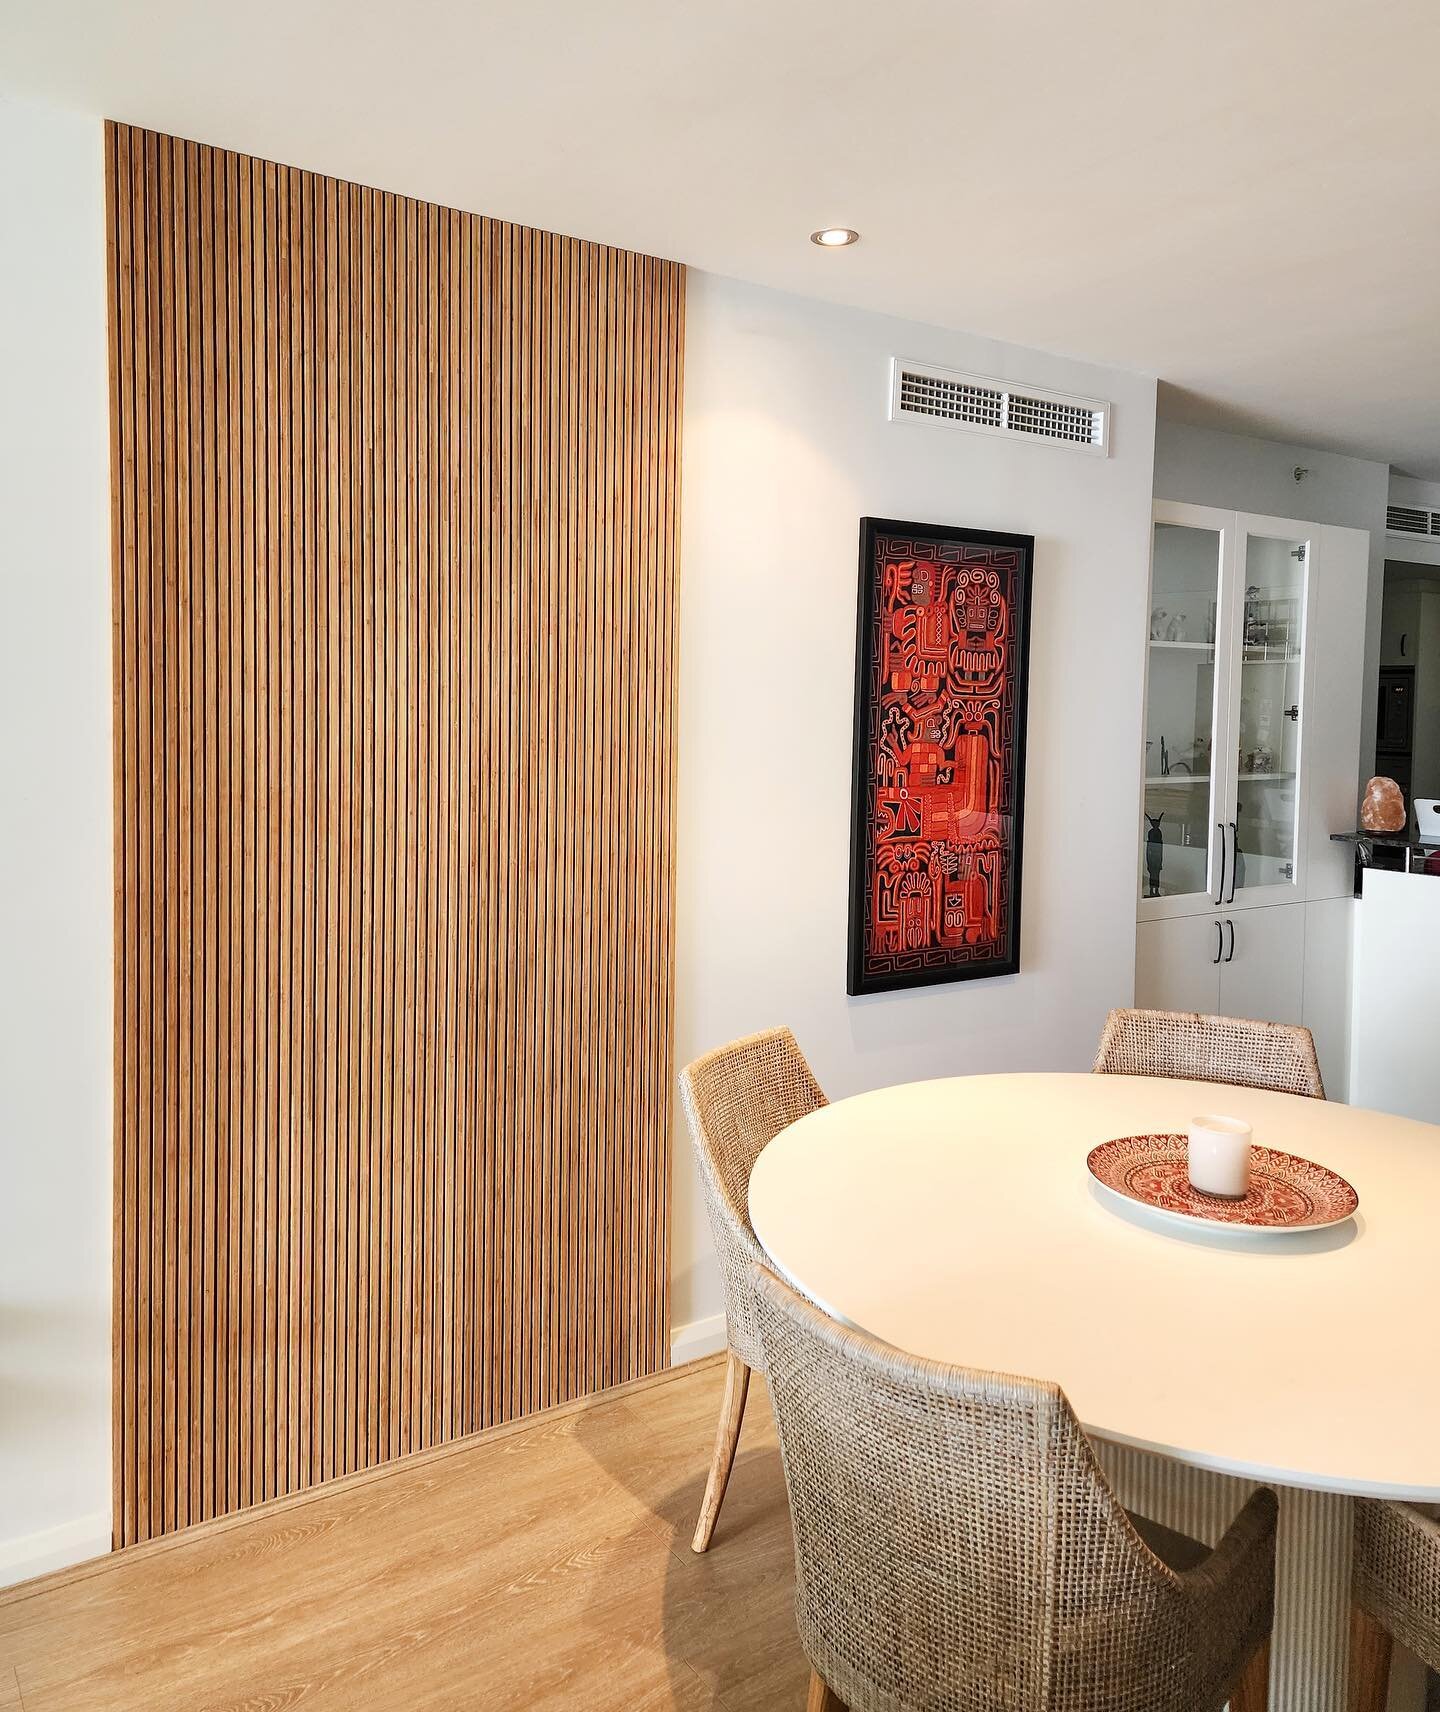 Love this install in our customer's Perth City apartment today! 

A small section of our bamboo cladding has defined the dining space from the kitchen and ties in perfectly with the flooring and furnishings 👌🏻

Profile: Linear6
Colour: Natural
Inst